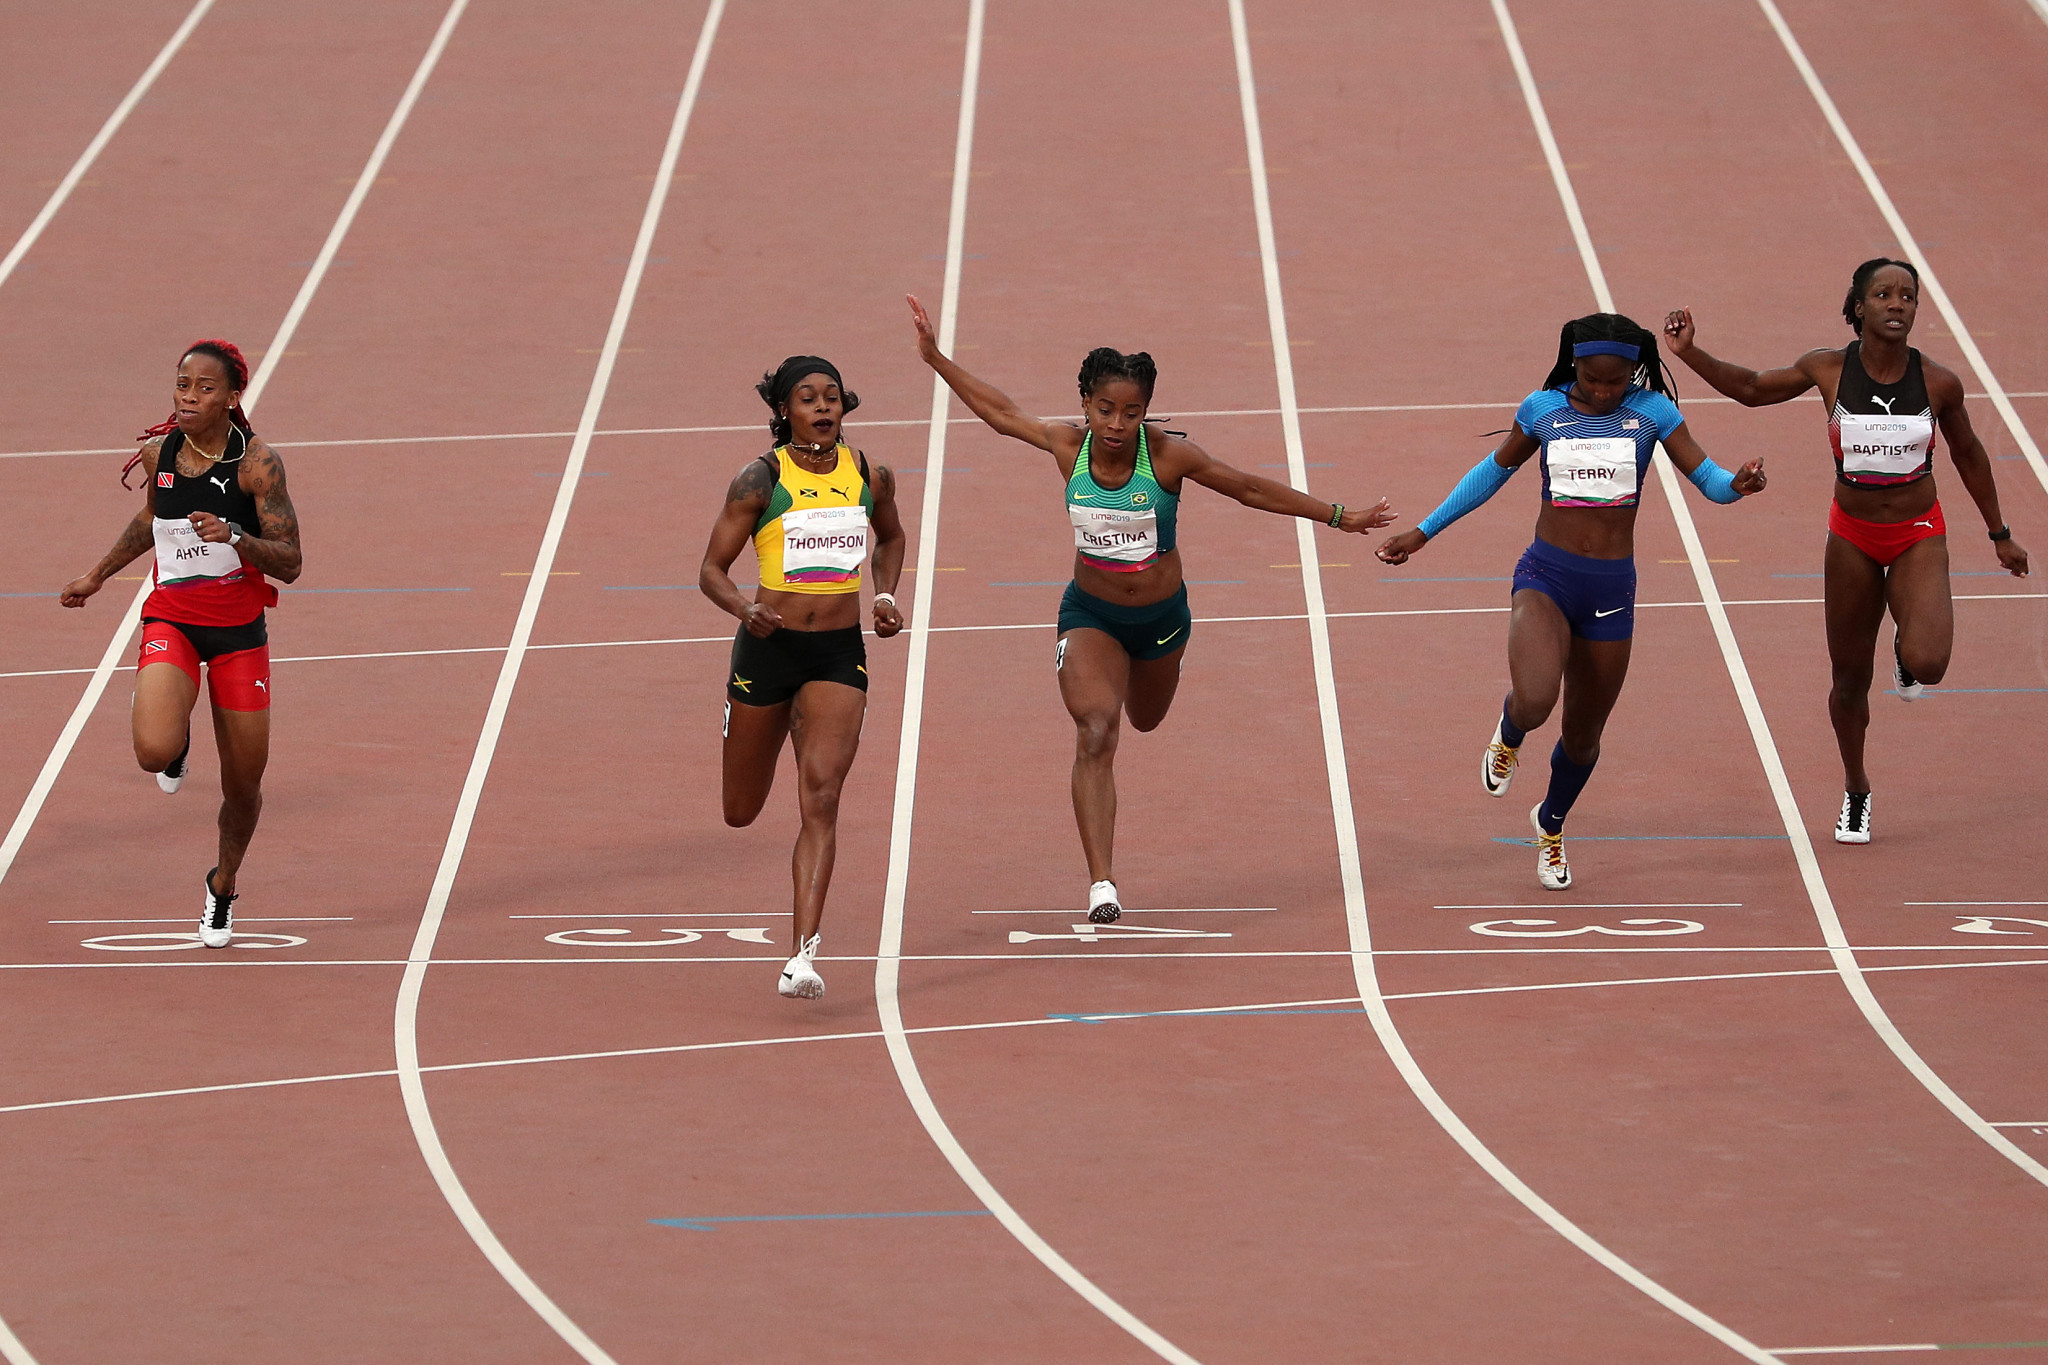 Elaine Thompson triumphed in the women's 100m final ©Getty Images